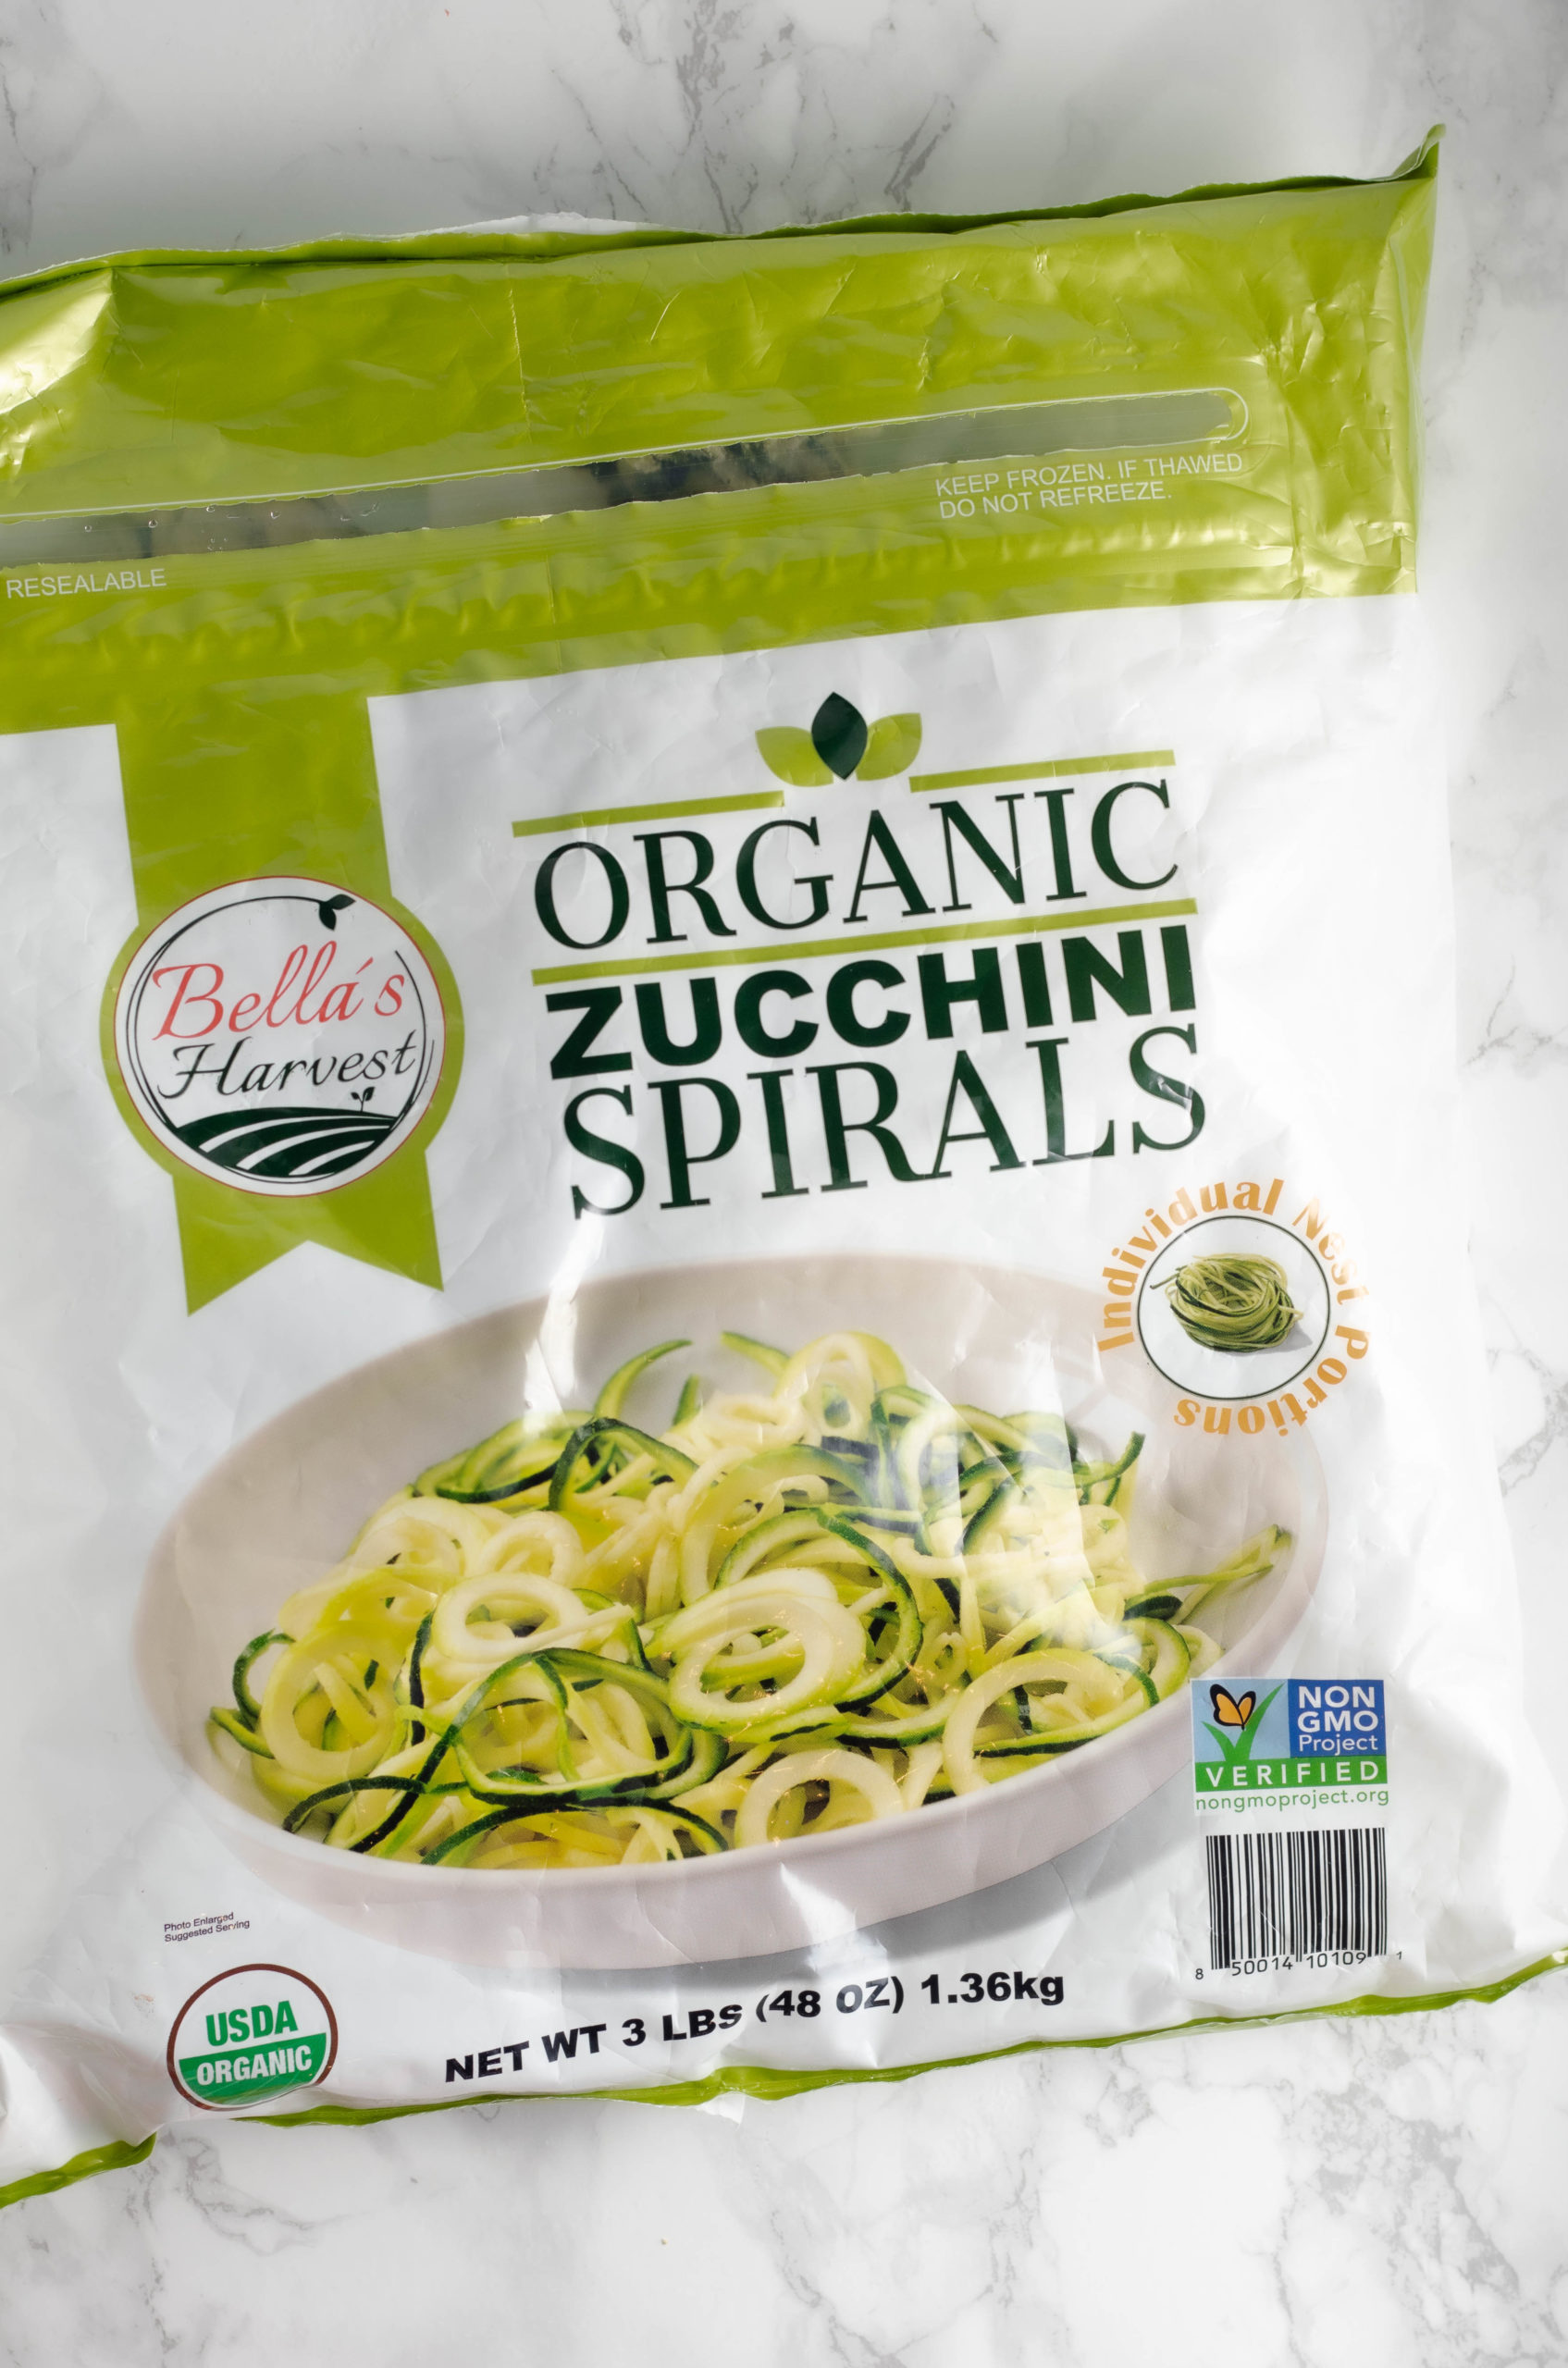 Zucchini noodles are a pasta replacement for gluten free, low carb, and keto recipes.